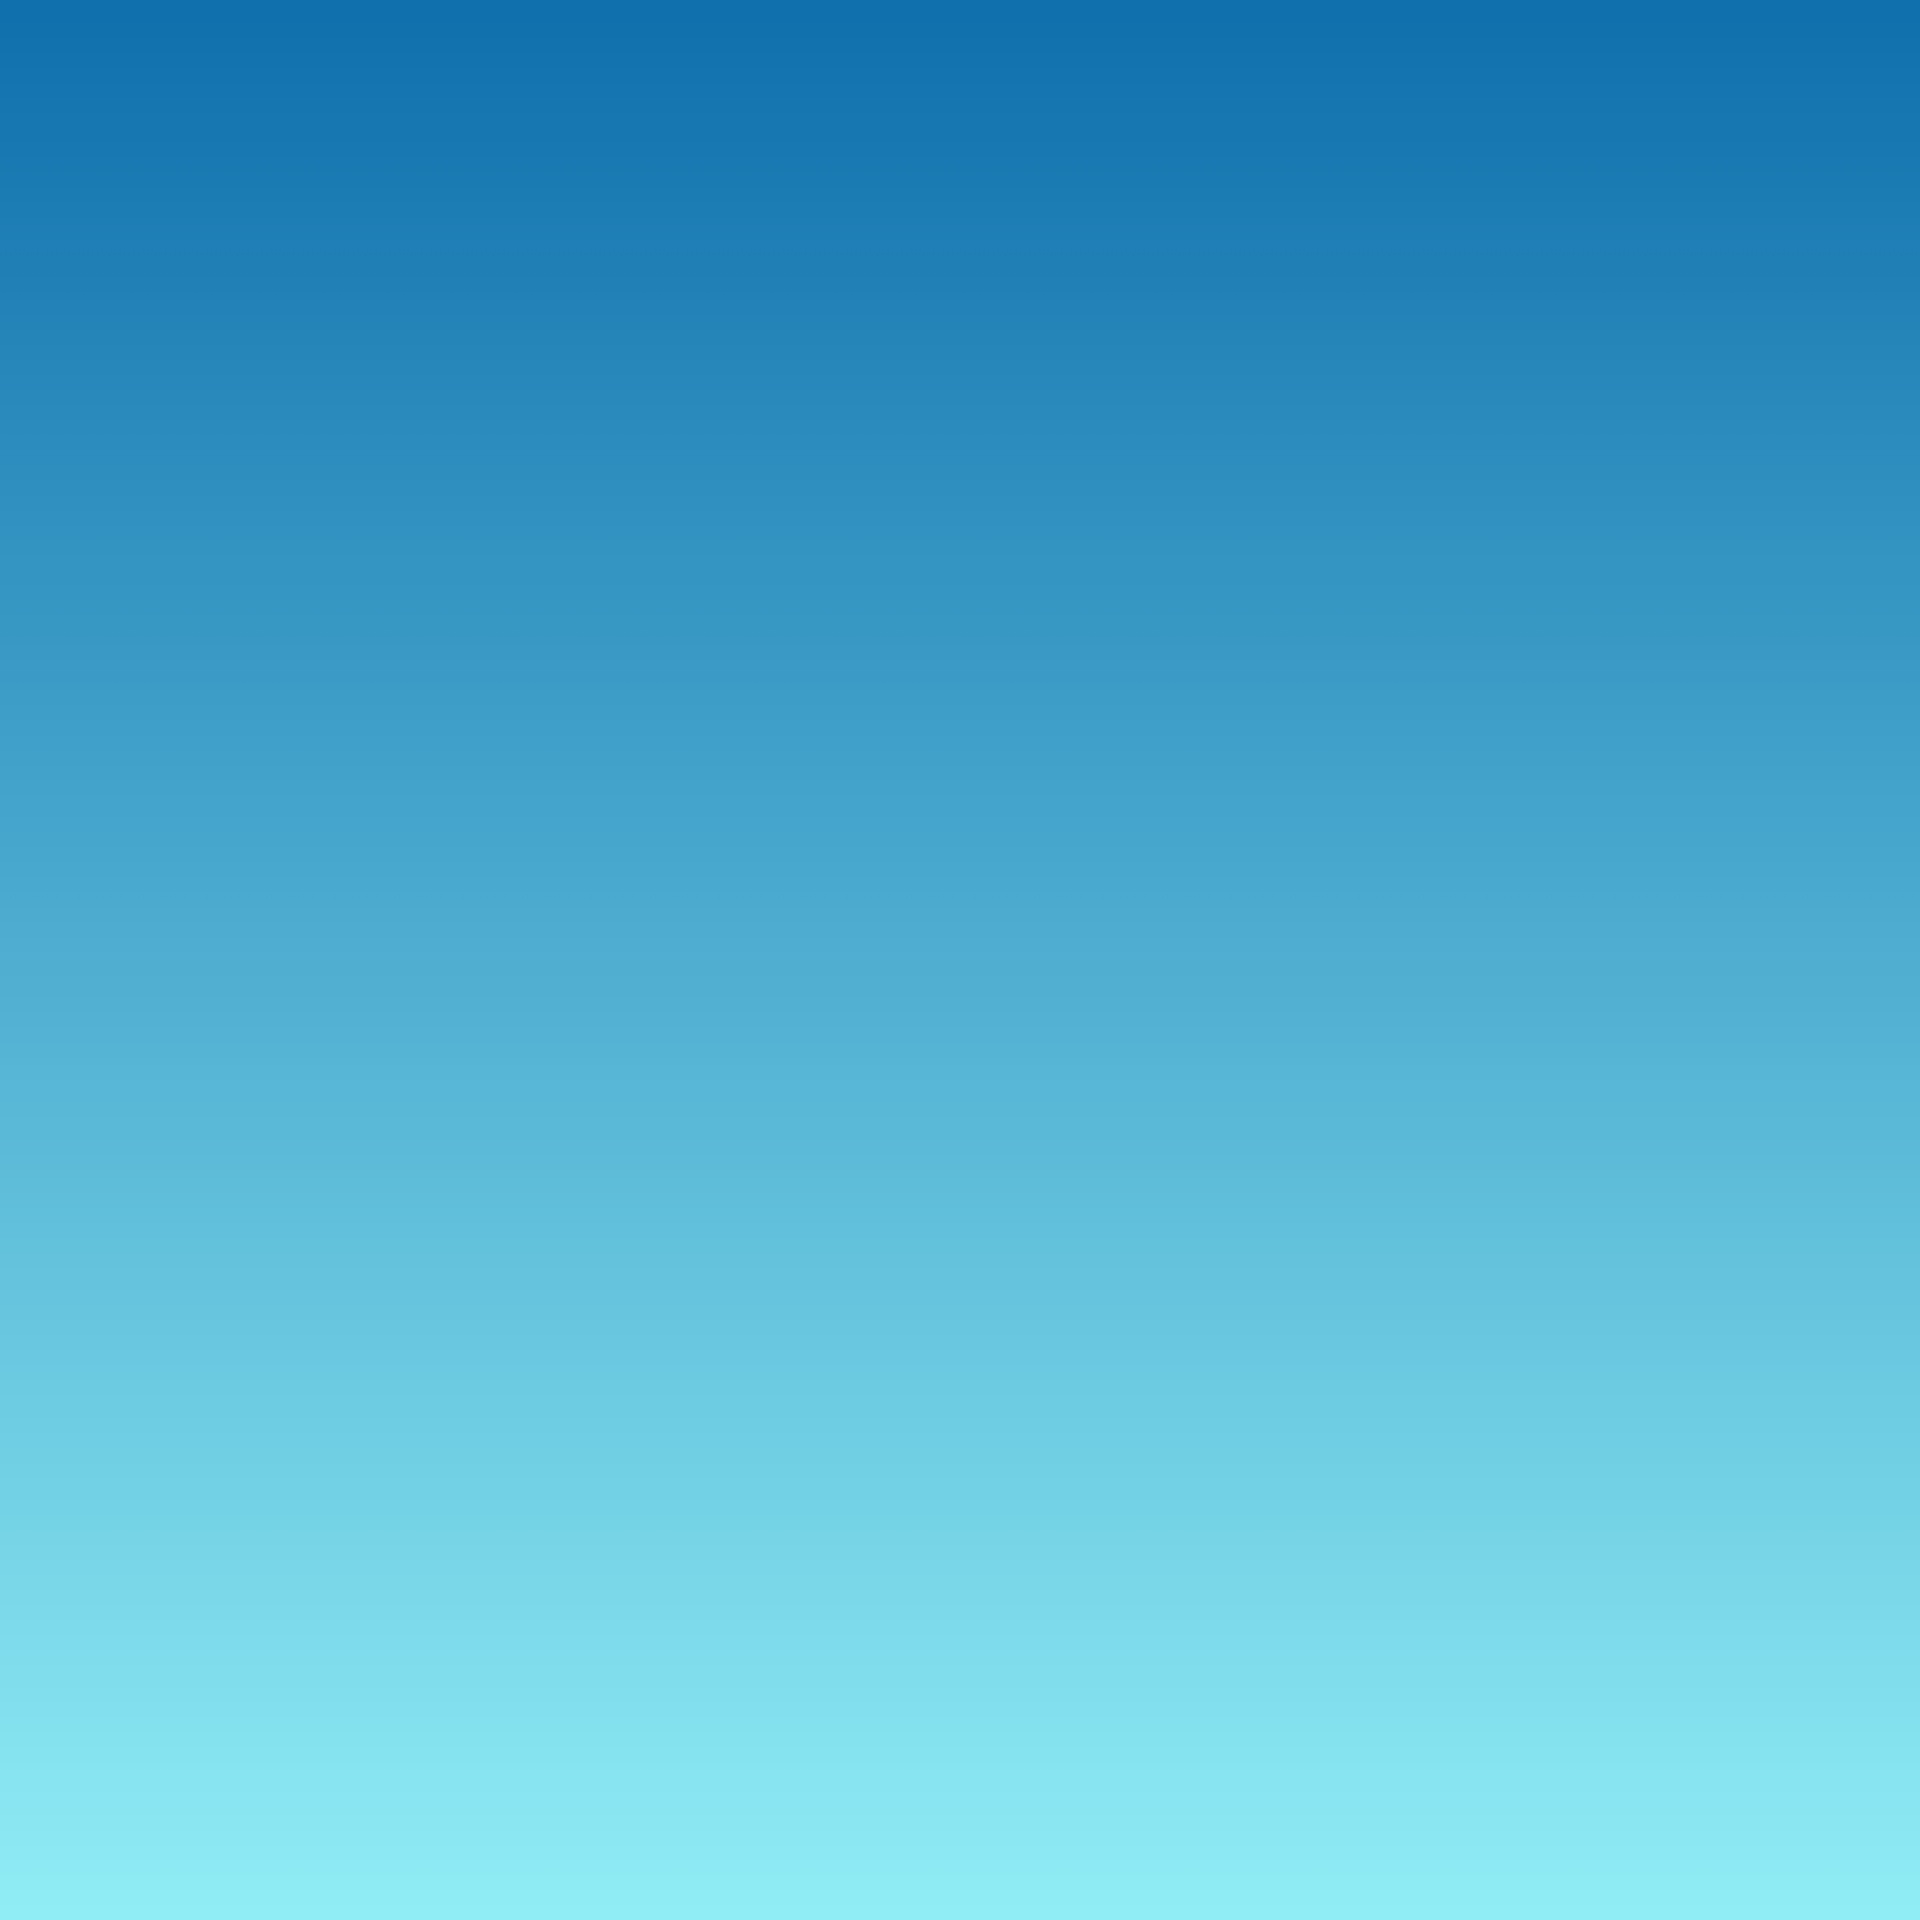 Photo Of Gradient Blue Background Wallpaper Square